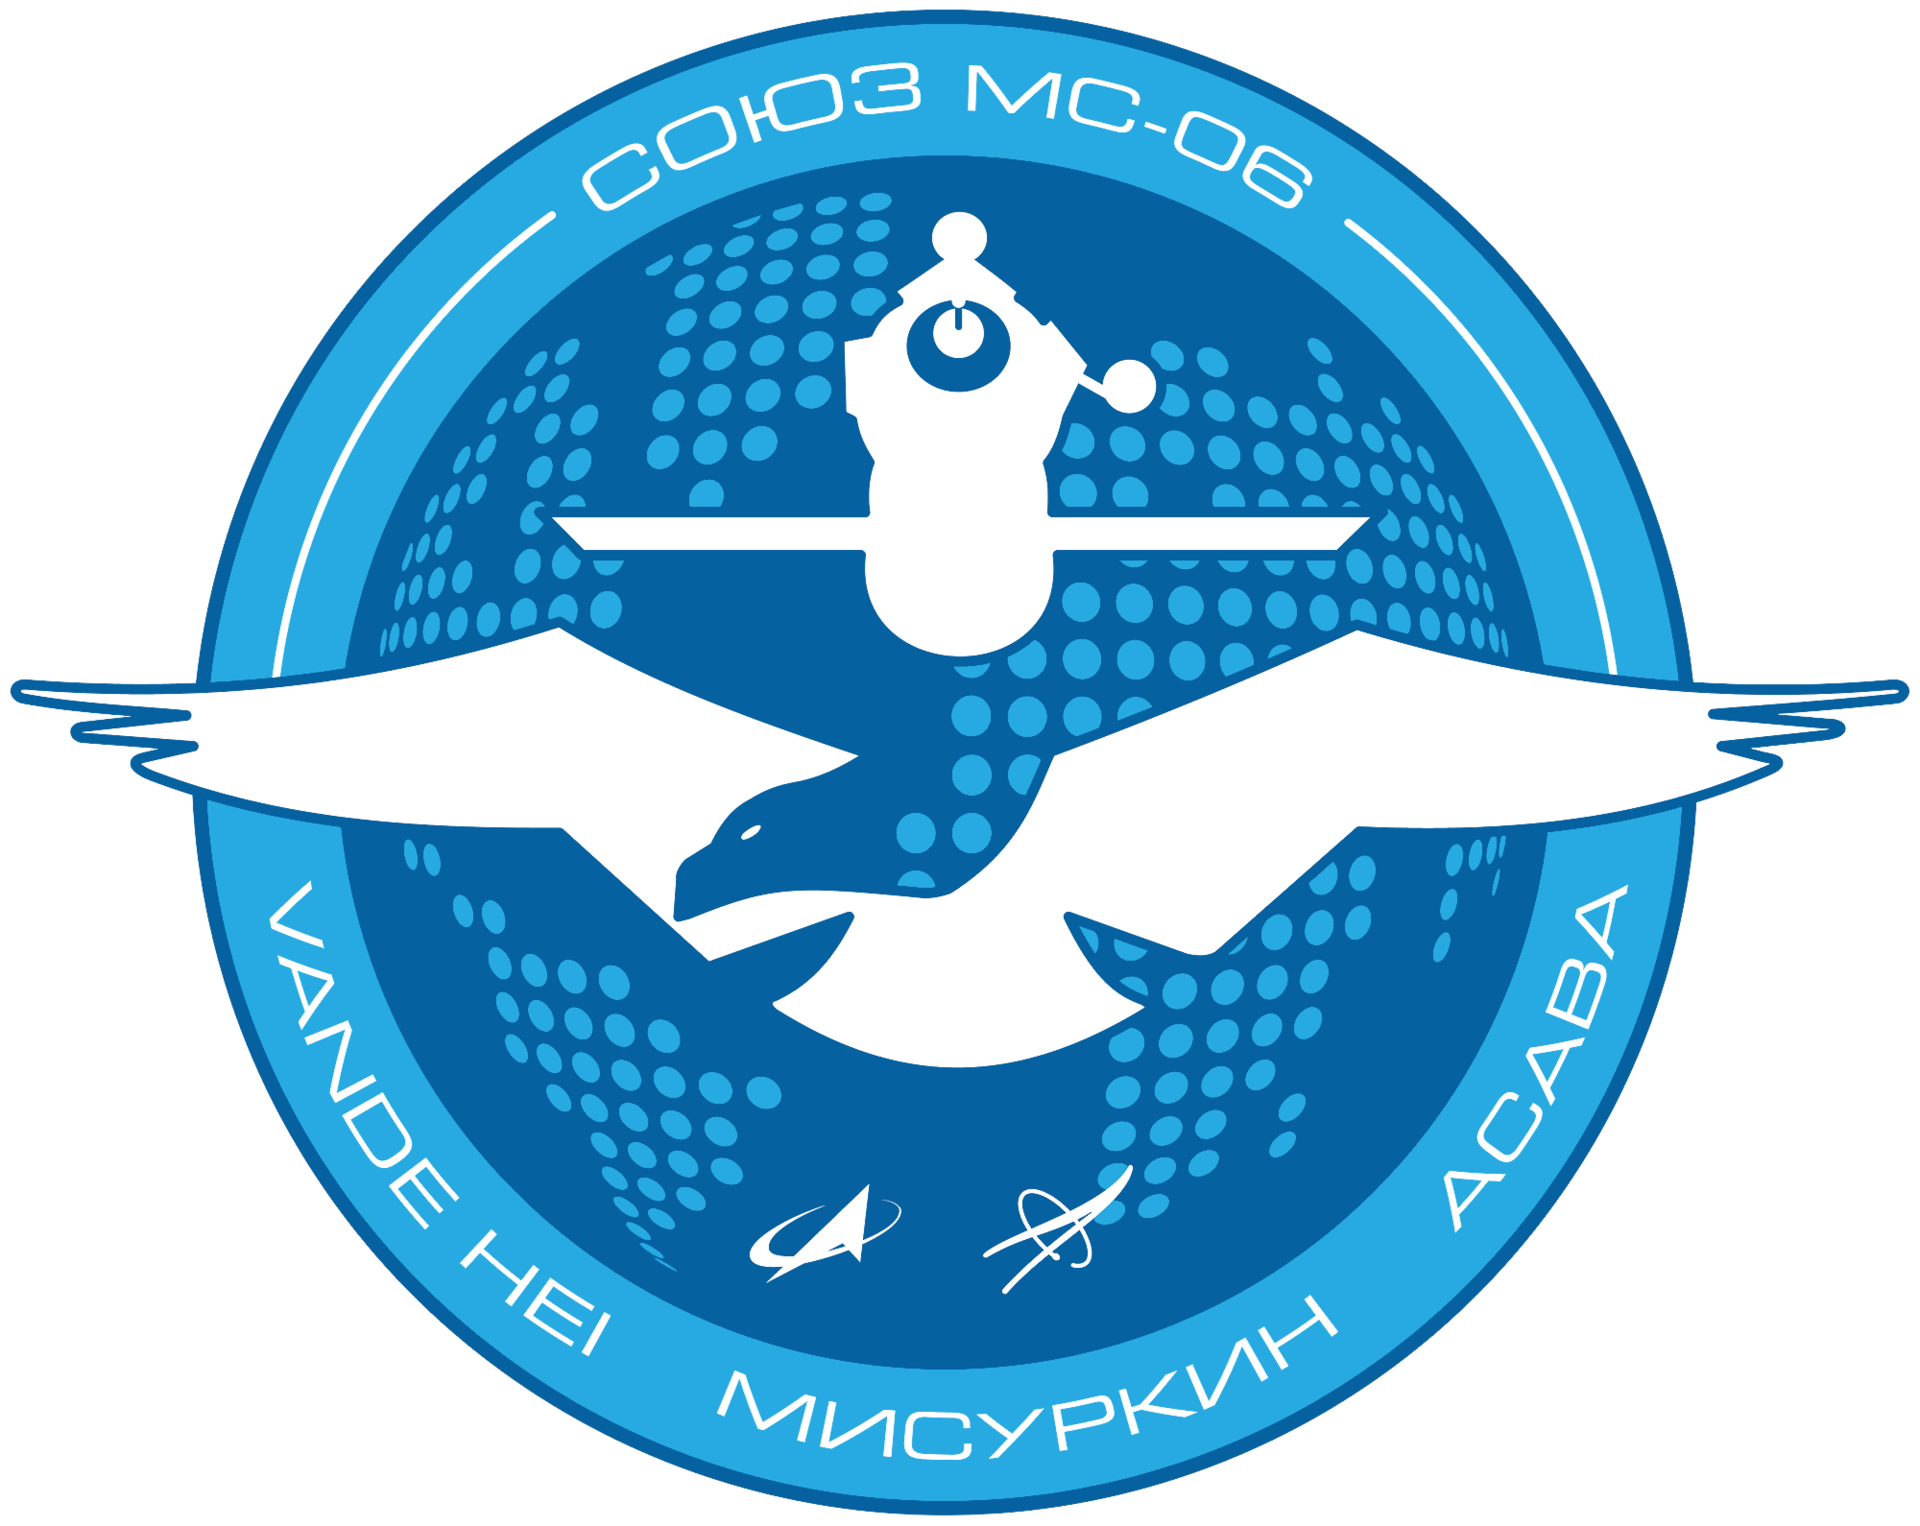 Mission patch for Soyuz MS-06